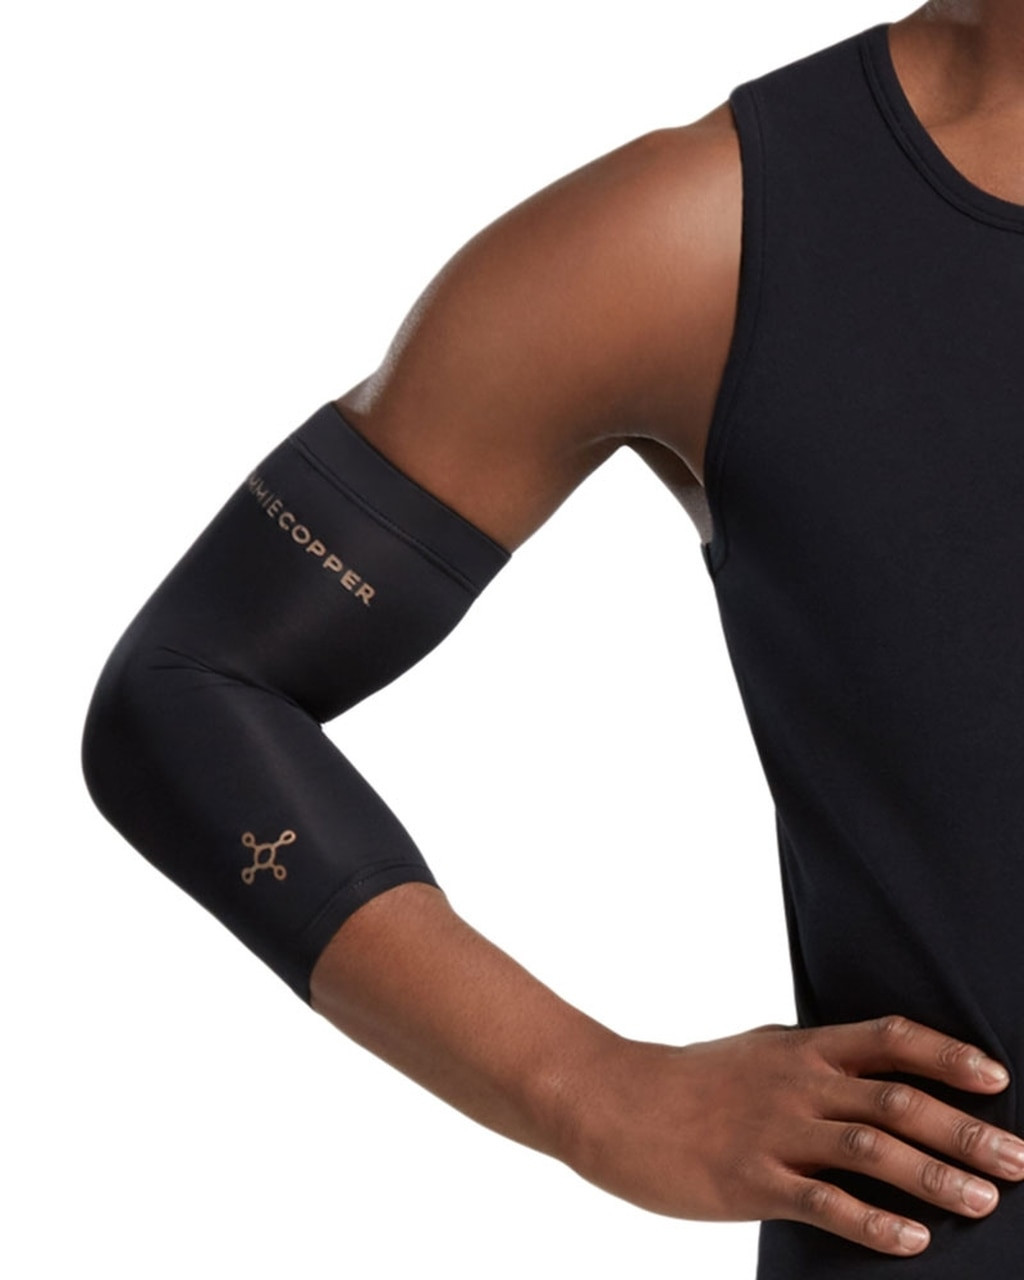 Tommie Copper Infrared Infused Compression Knee Sleeve